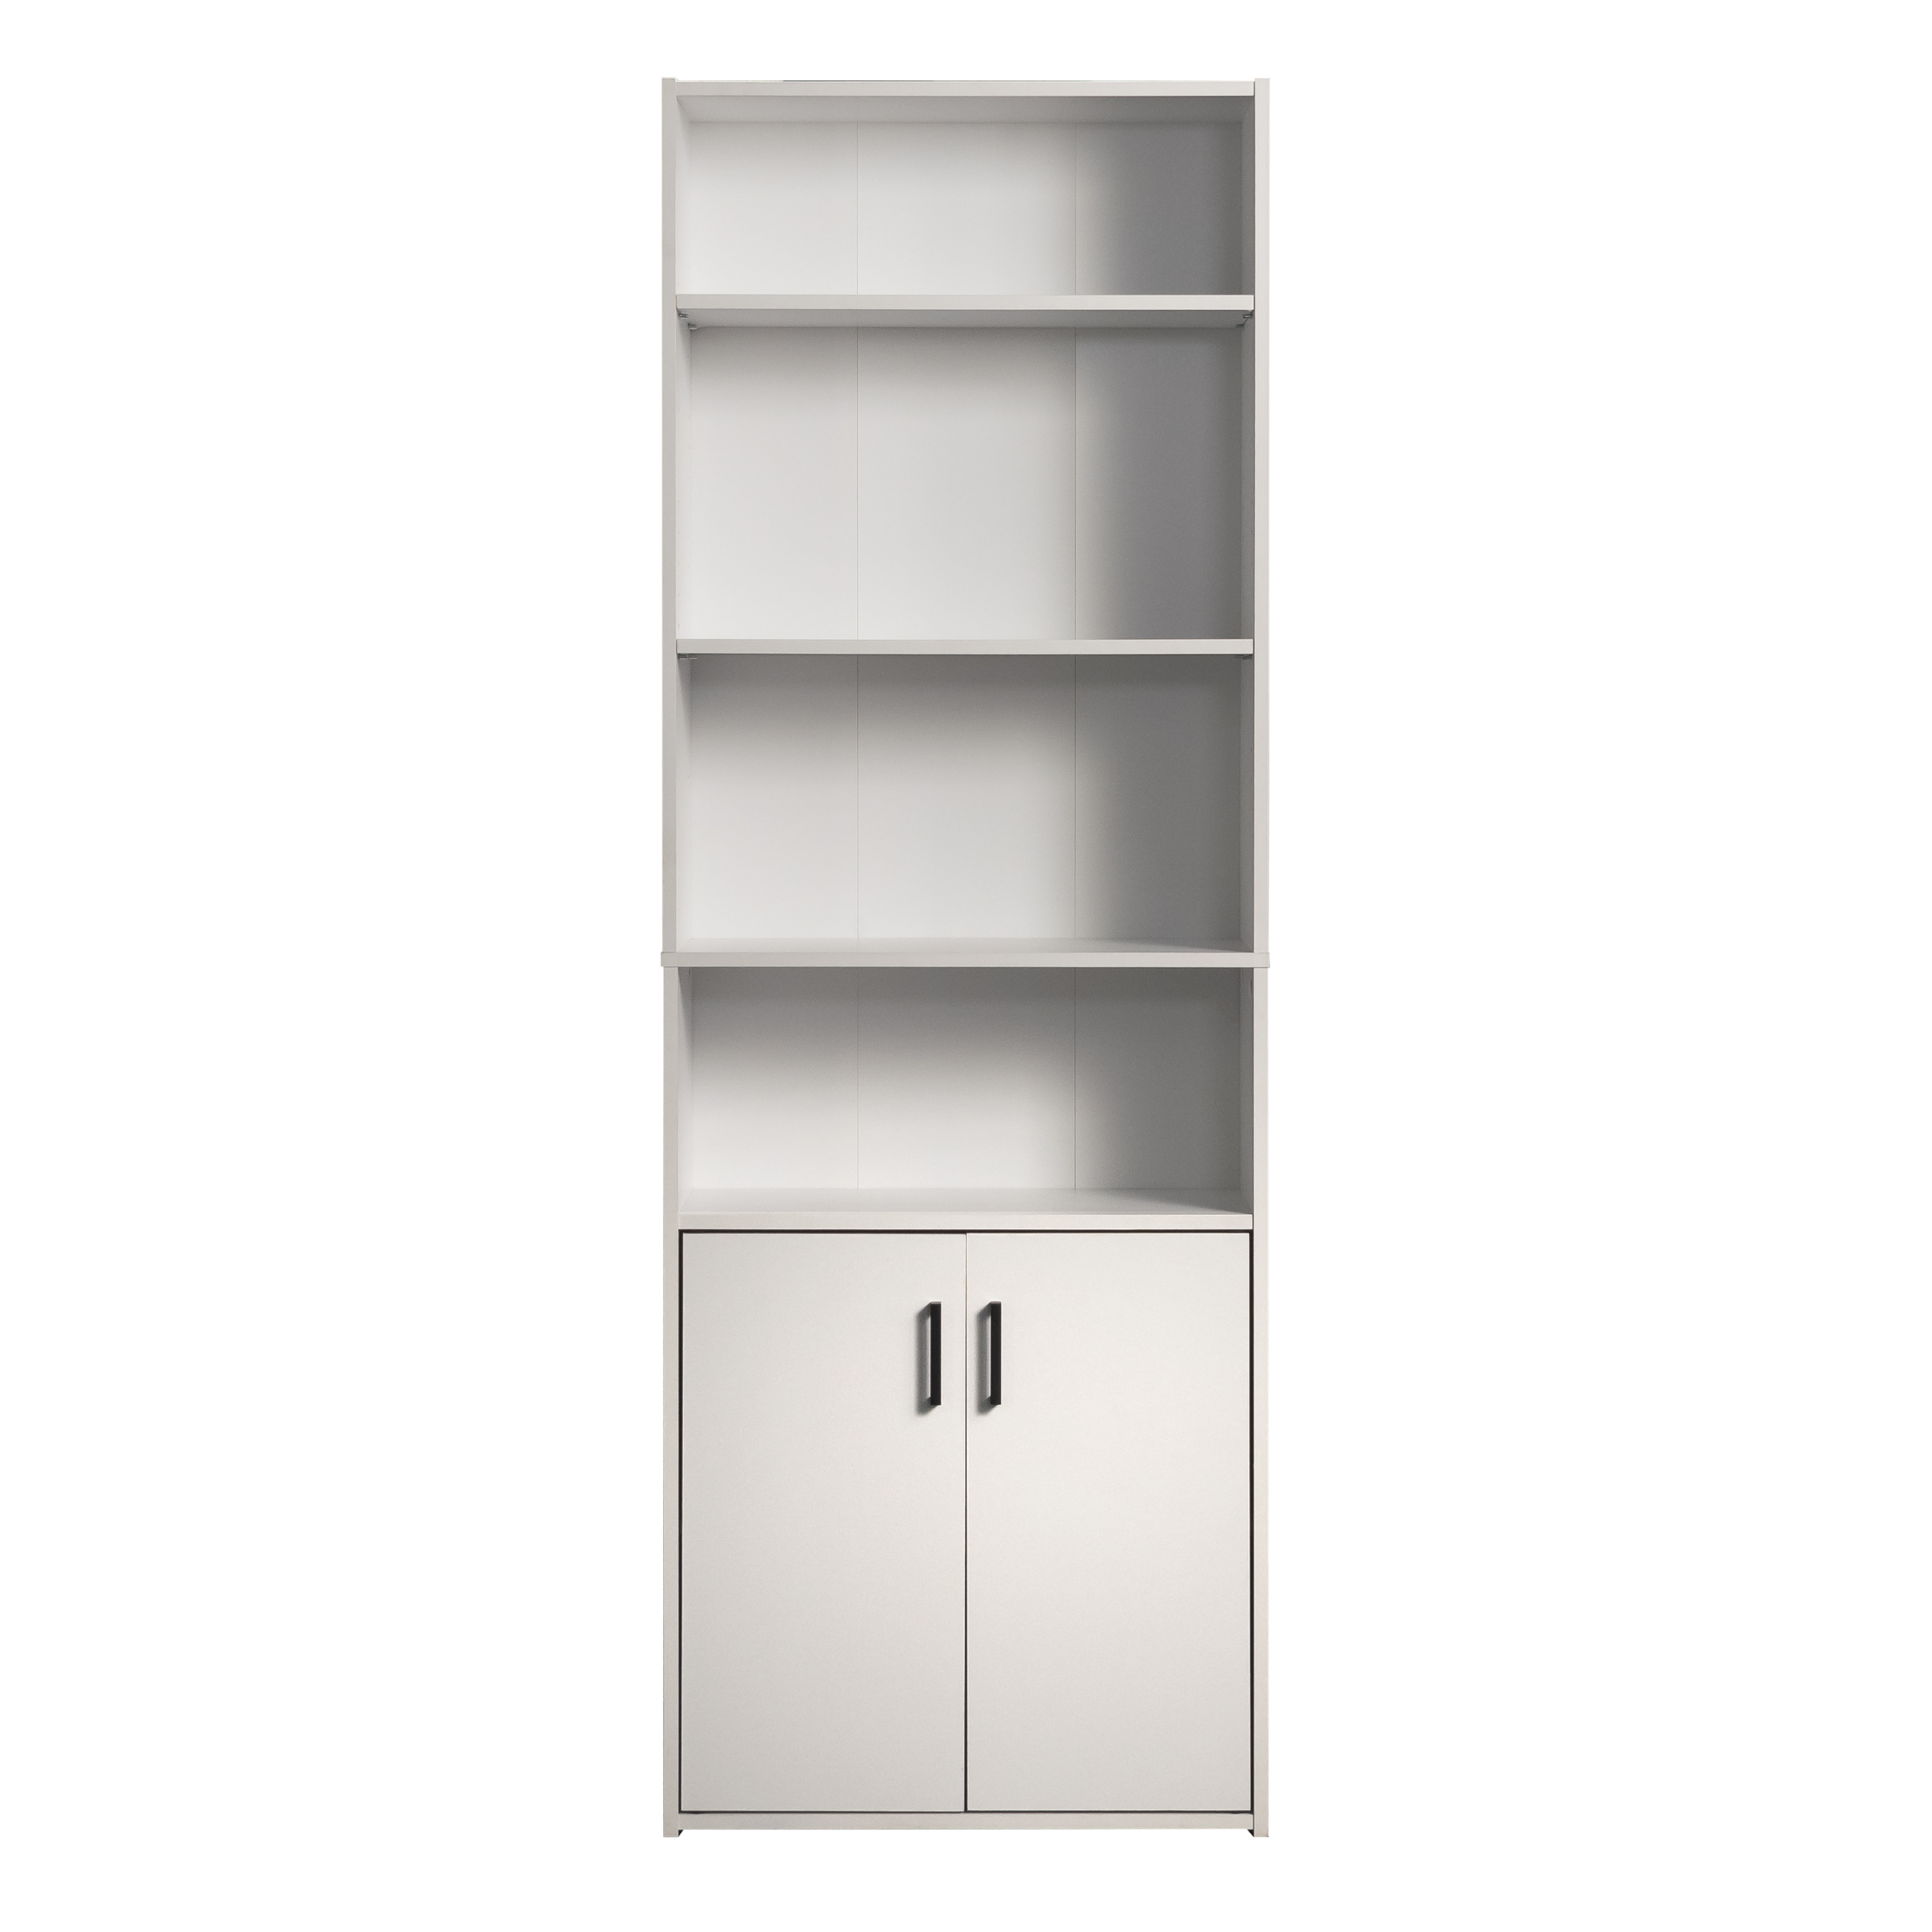 Mainstays Traditional 5 Shelf Bookcase with Doors, Soft White - image 3 of 5